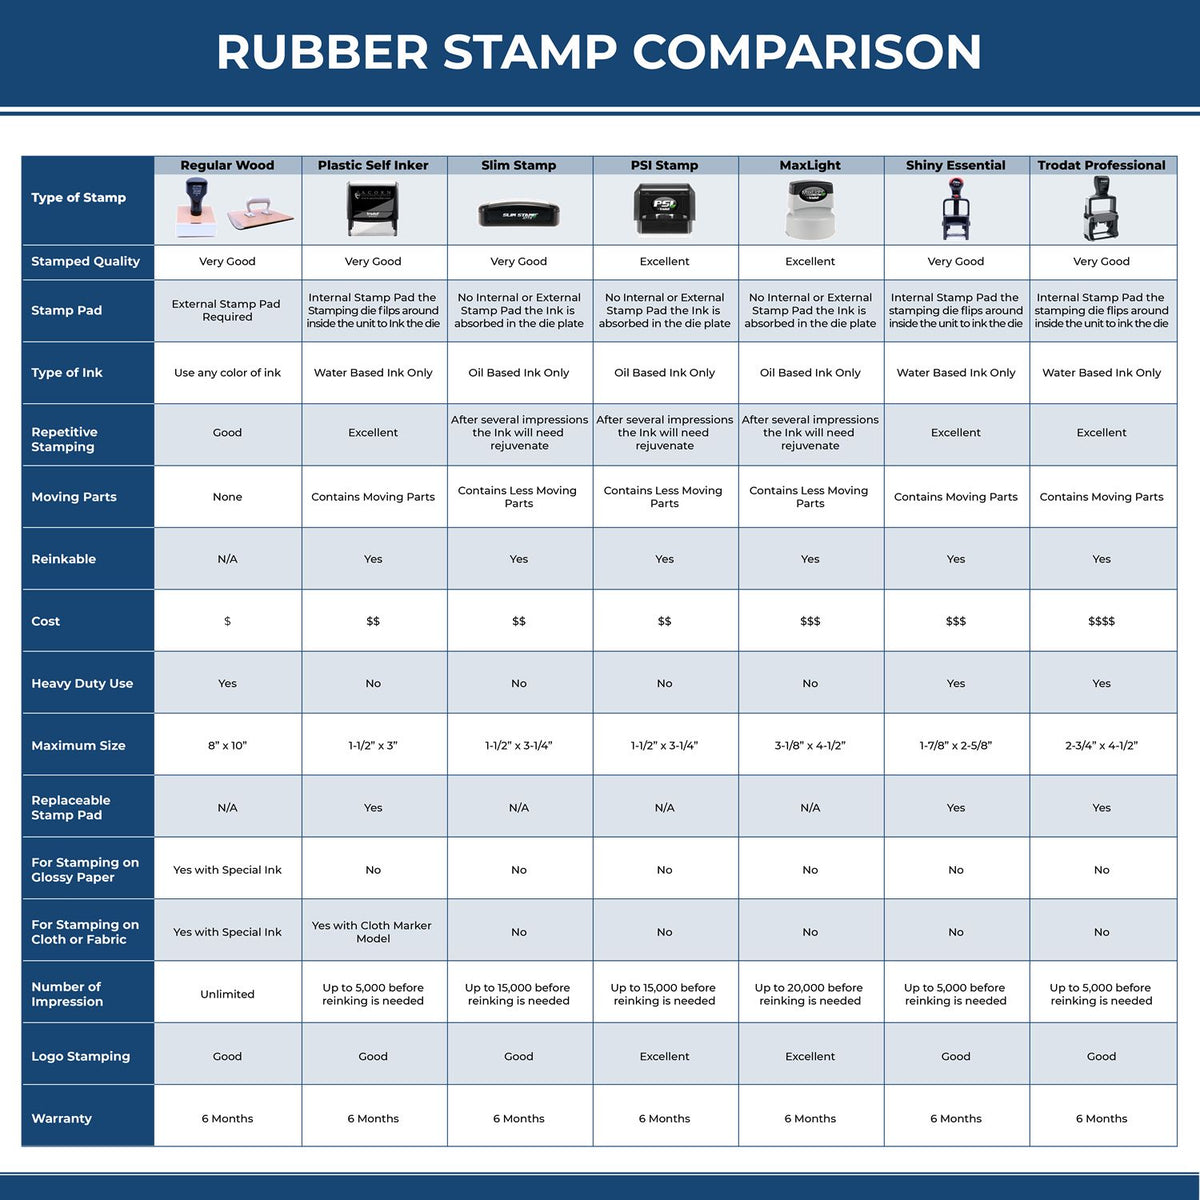 Large Completed Together In Class Rubber Stamp 4694R Rubber Stamp Comparison